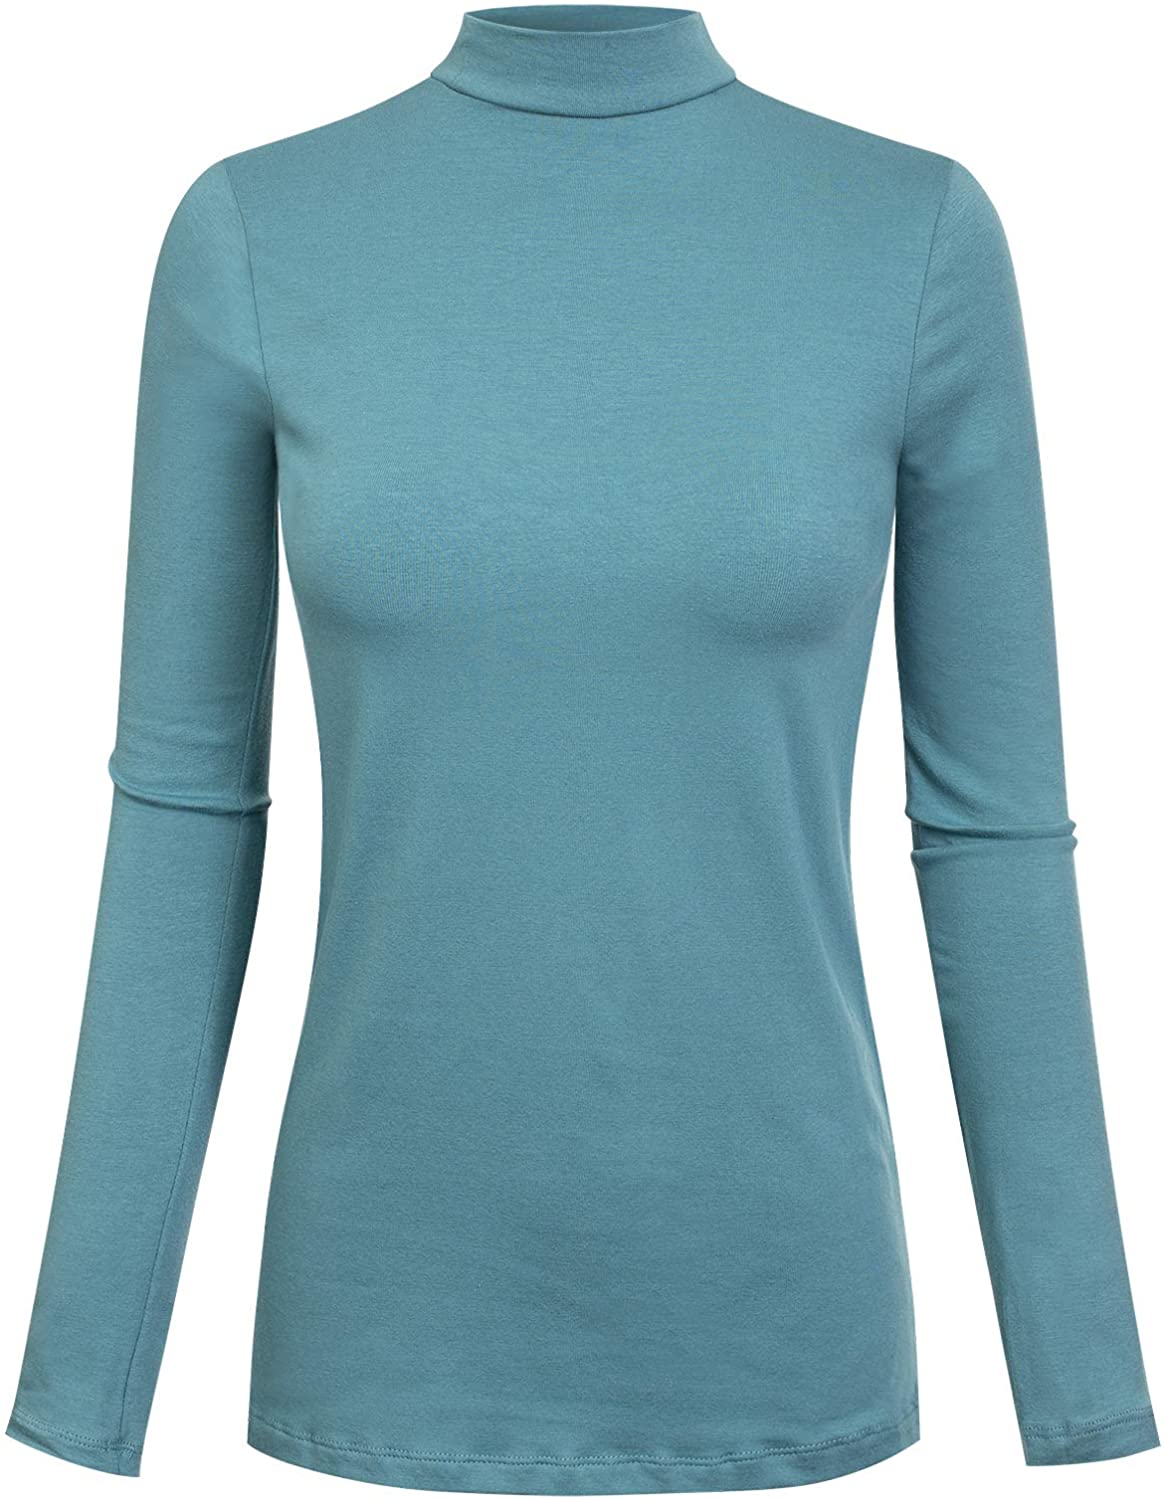 MixMatchy Womens Solid Tight Fit Lightweight Long Sleeves Mock Neck Top 